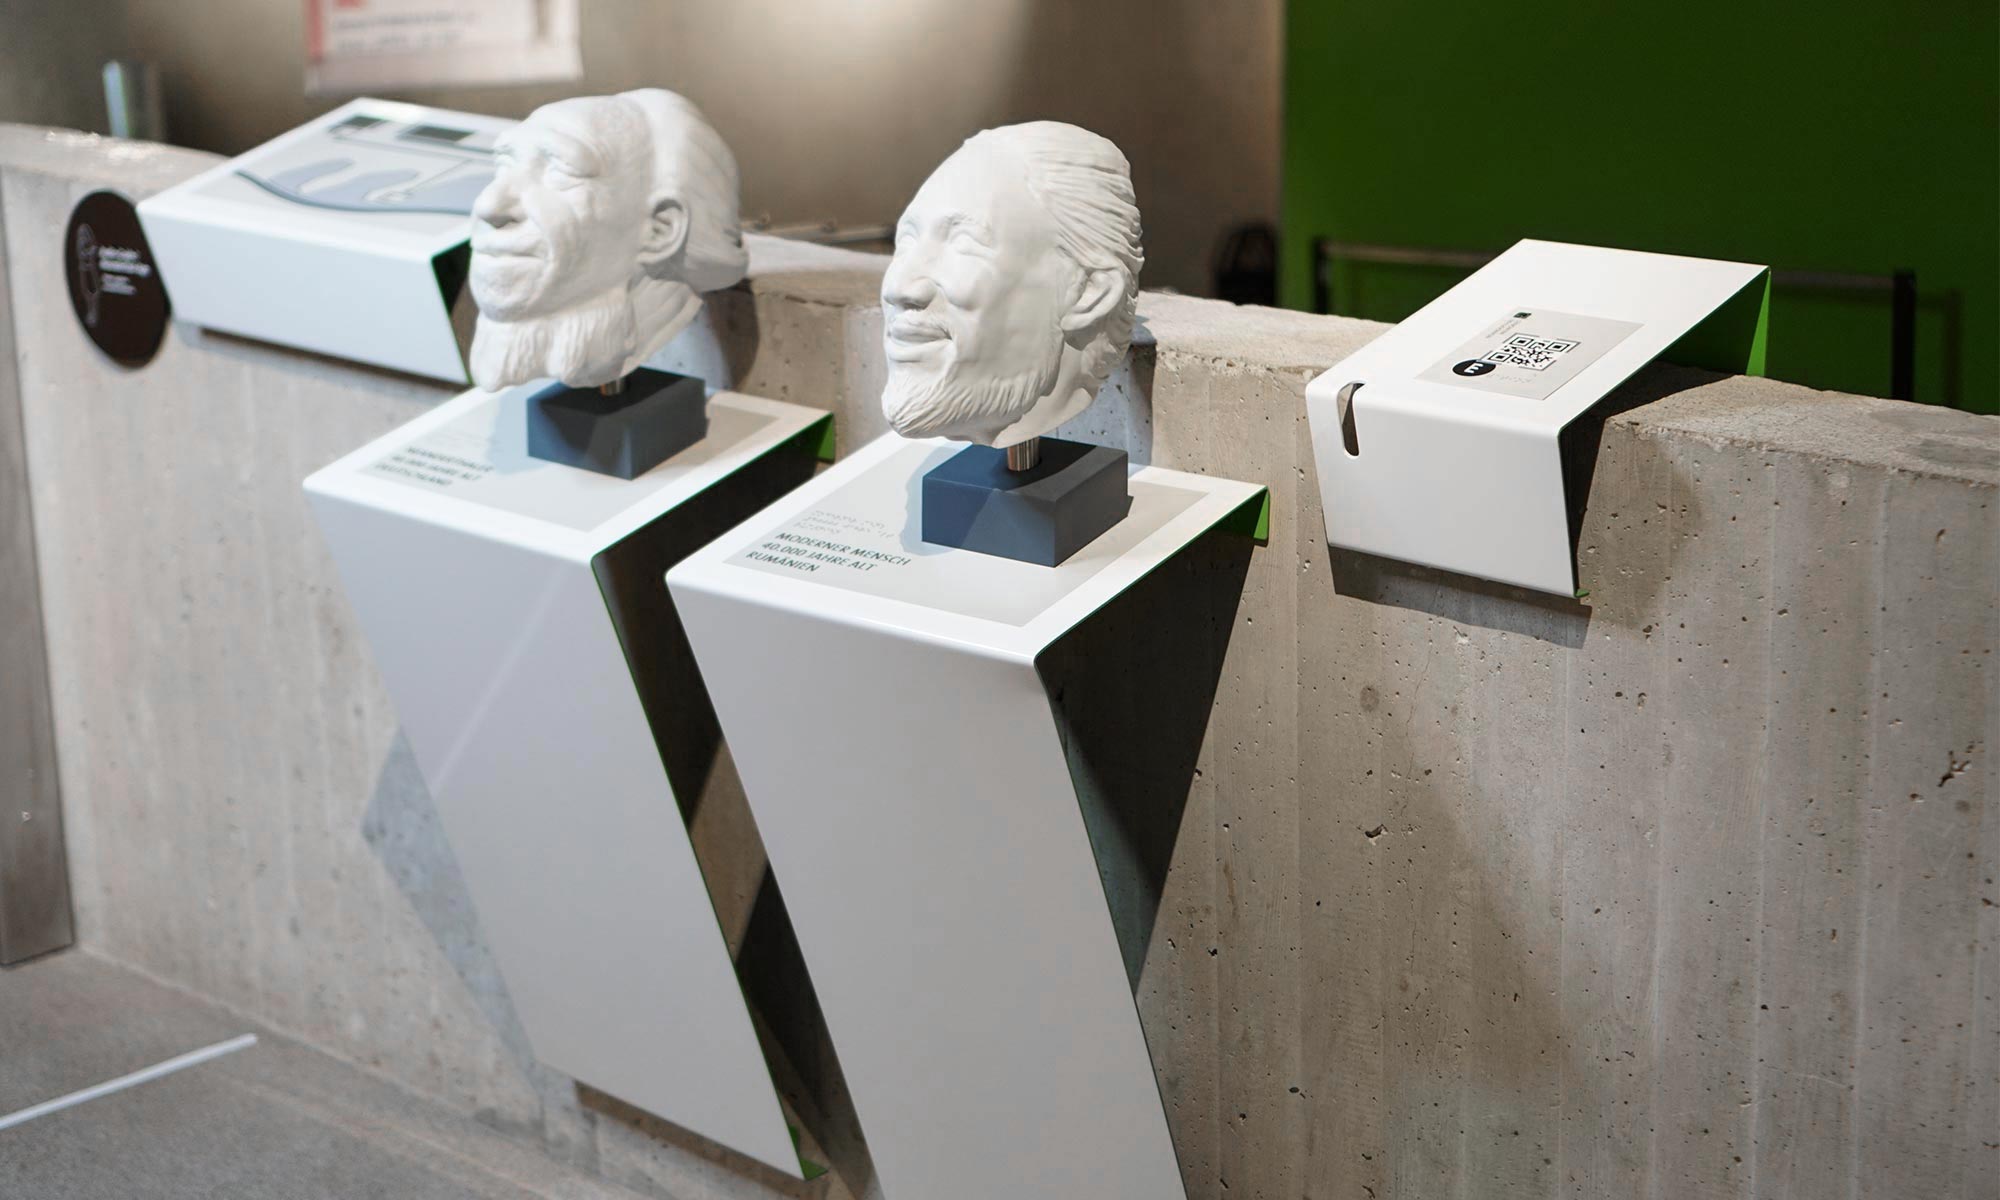 Two steel sheets bent at about 90 degrees are mounted on a concrete wall at an angle and projecting forwards. They stand next to each other and palpable models of Neanderthal heads are assembled on the upper surface. To the left and right of the tactile models are further tactile stations mounted on the approx. 1.50 metre high wall. The sheets are white and painted a light green towards the wall.